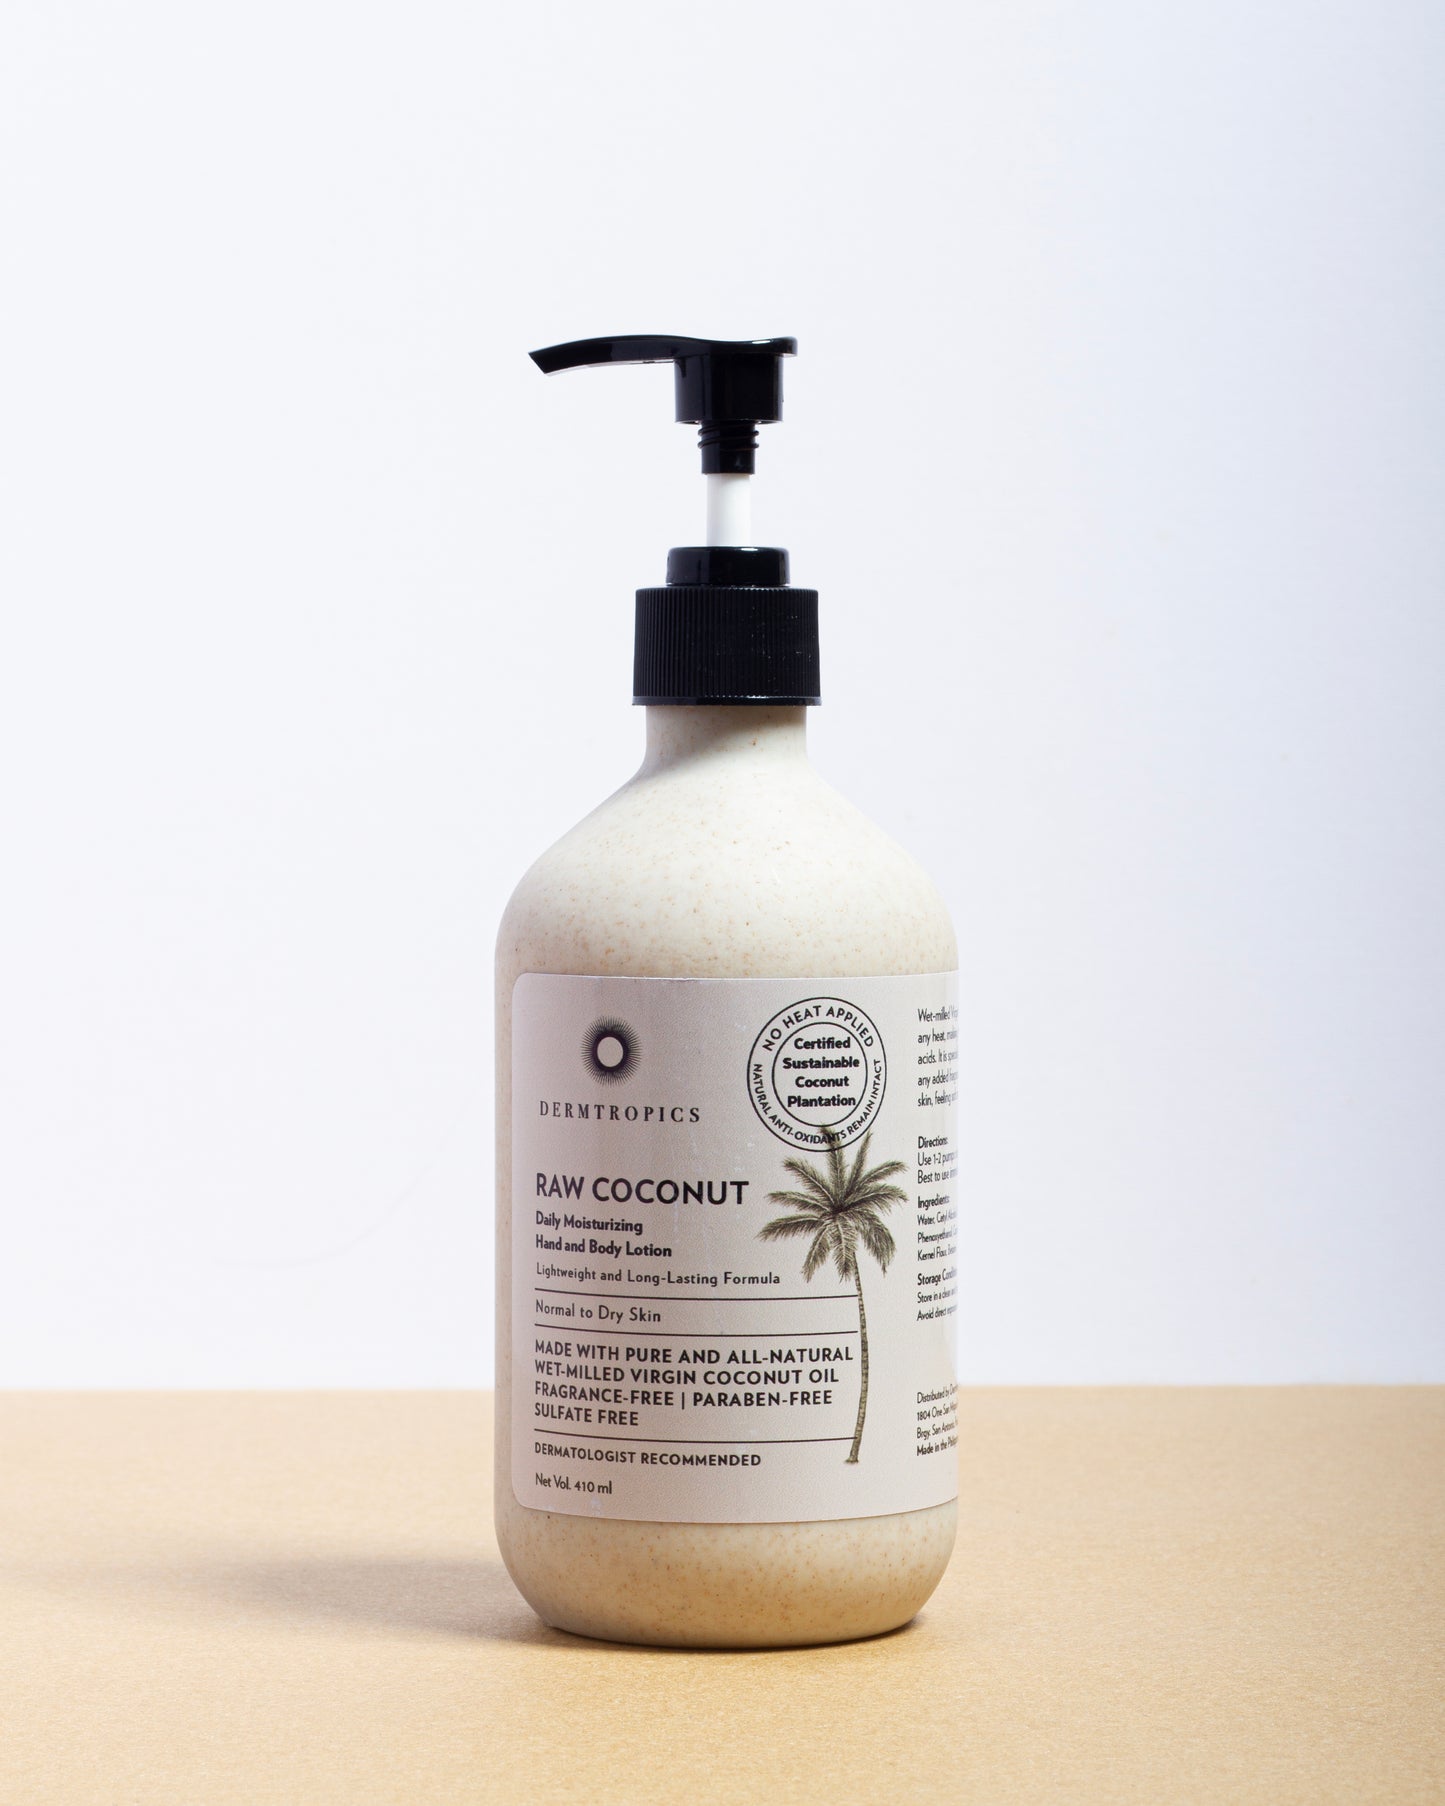 NEW - Raw Coconut Daily Moisturizing Hand and Body Lotion